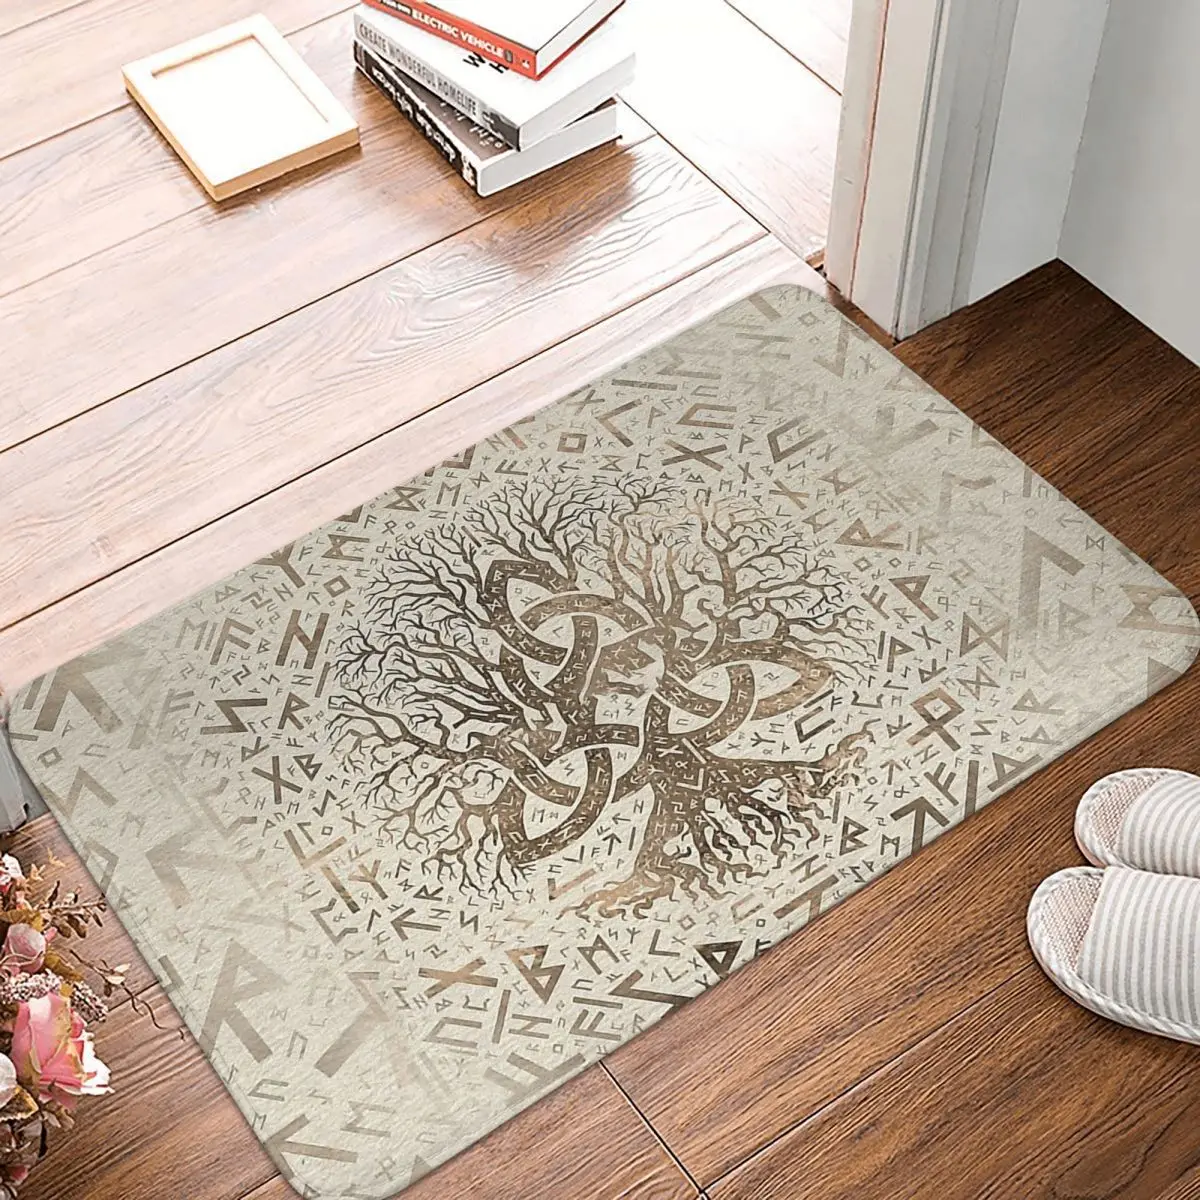 

Ragnar Lothbrok Lagertha Rollo TV Series Bedroom Mat Tree Of With Triquetra And Futhark Doormat Living Room Carpet Rug